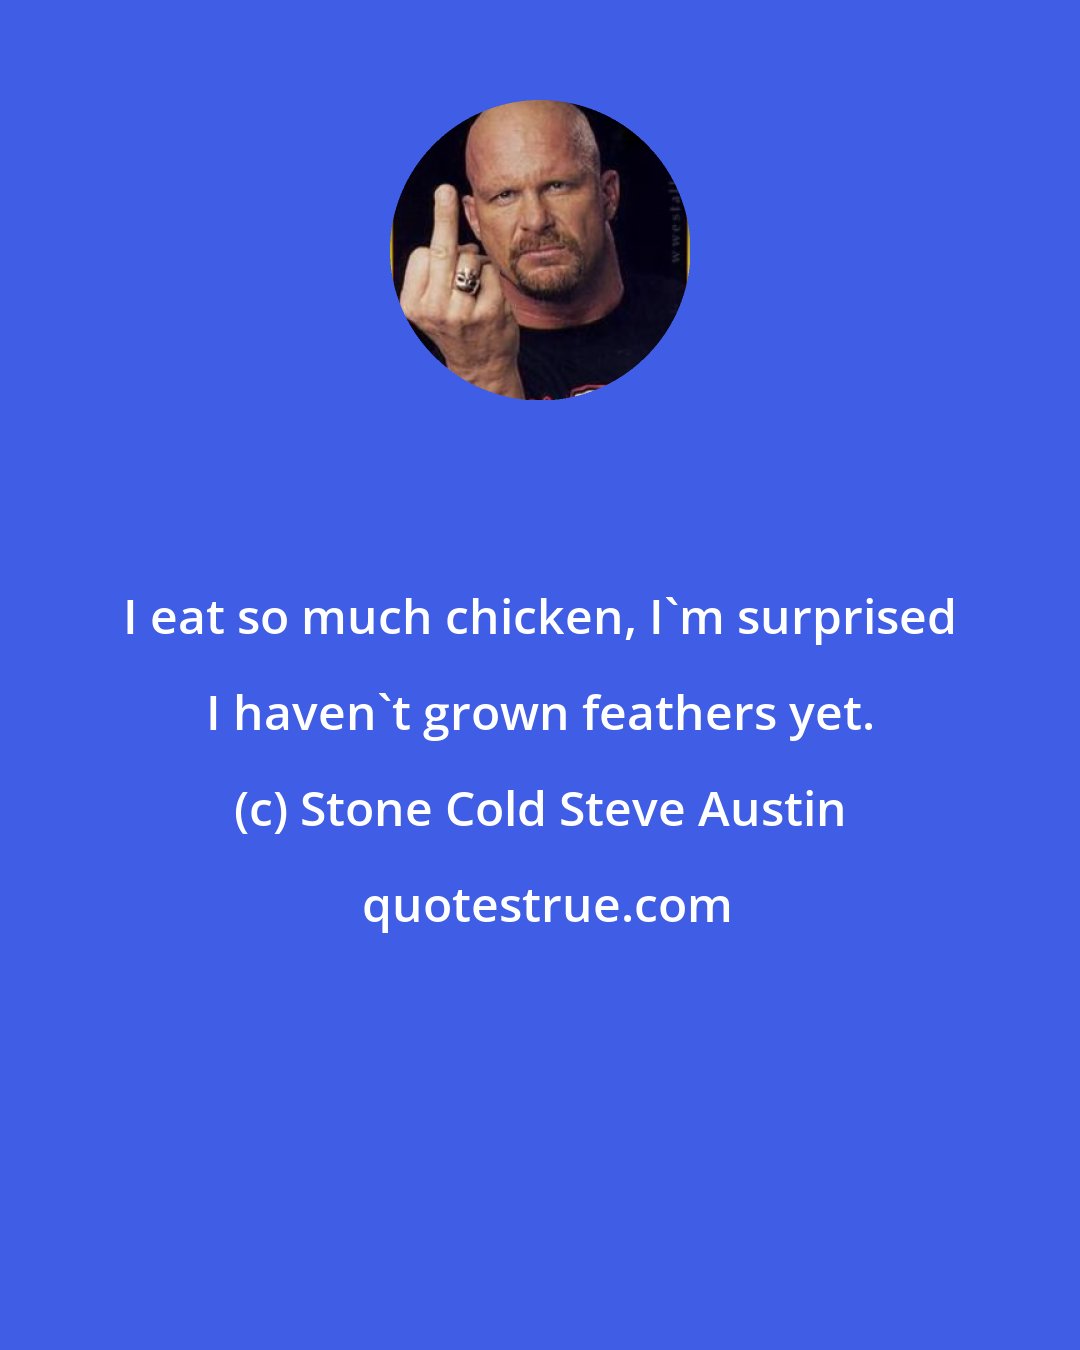 Stone Cold Steve Austin: I eat so much chicken, I'm surprised I haven't grown feathers yet.